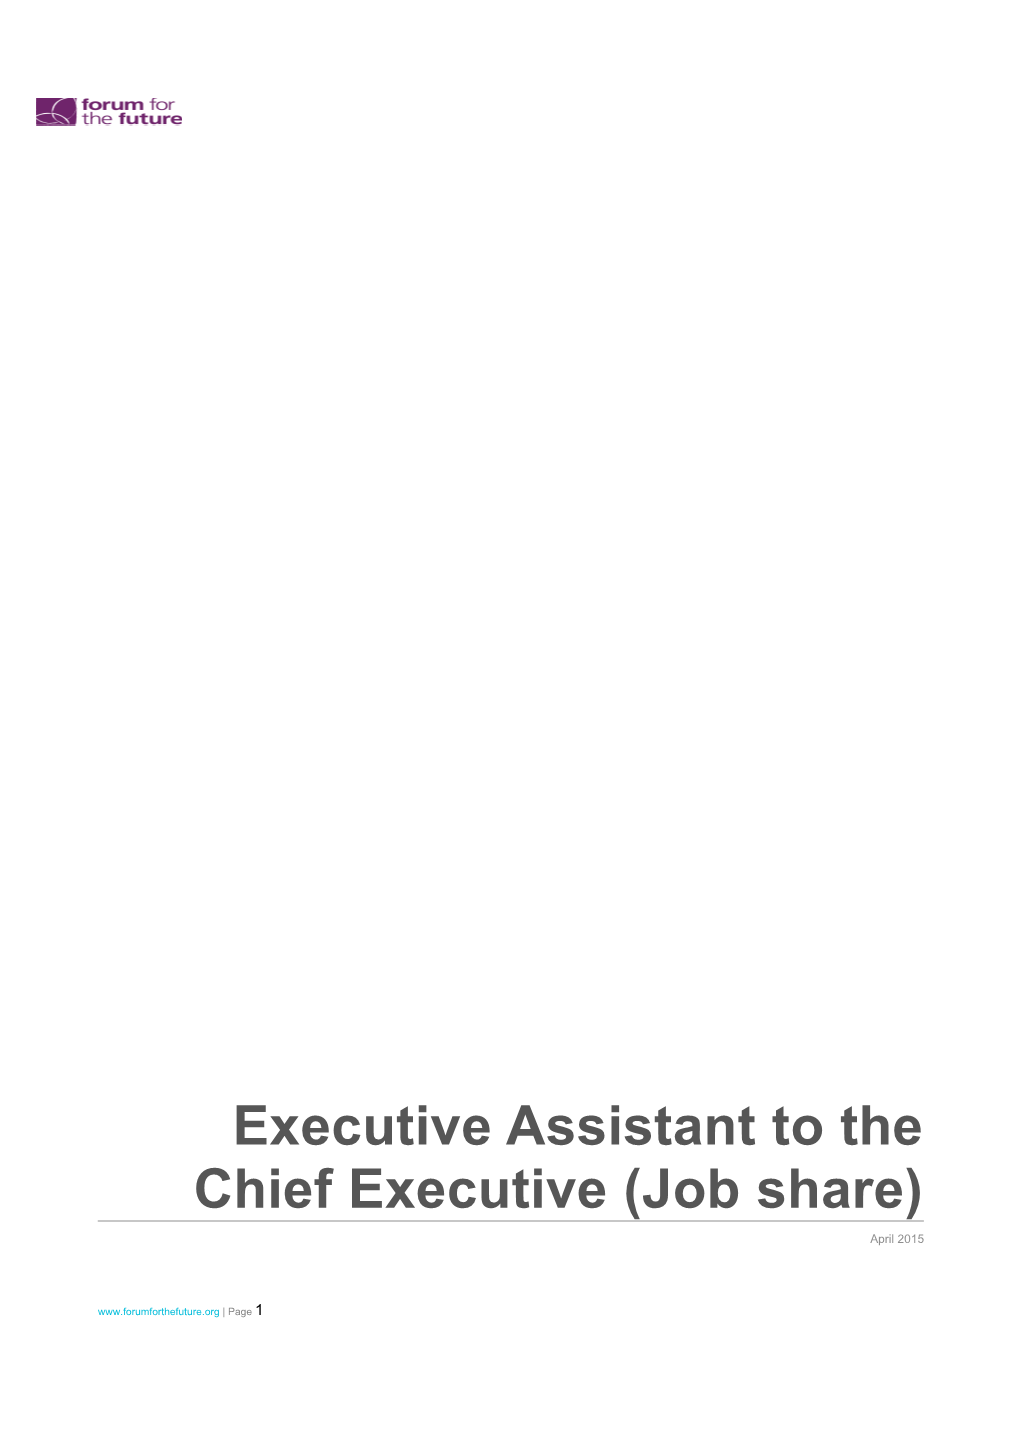 Executive Assistant to the Chief Executive (Job Share)